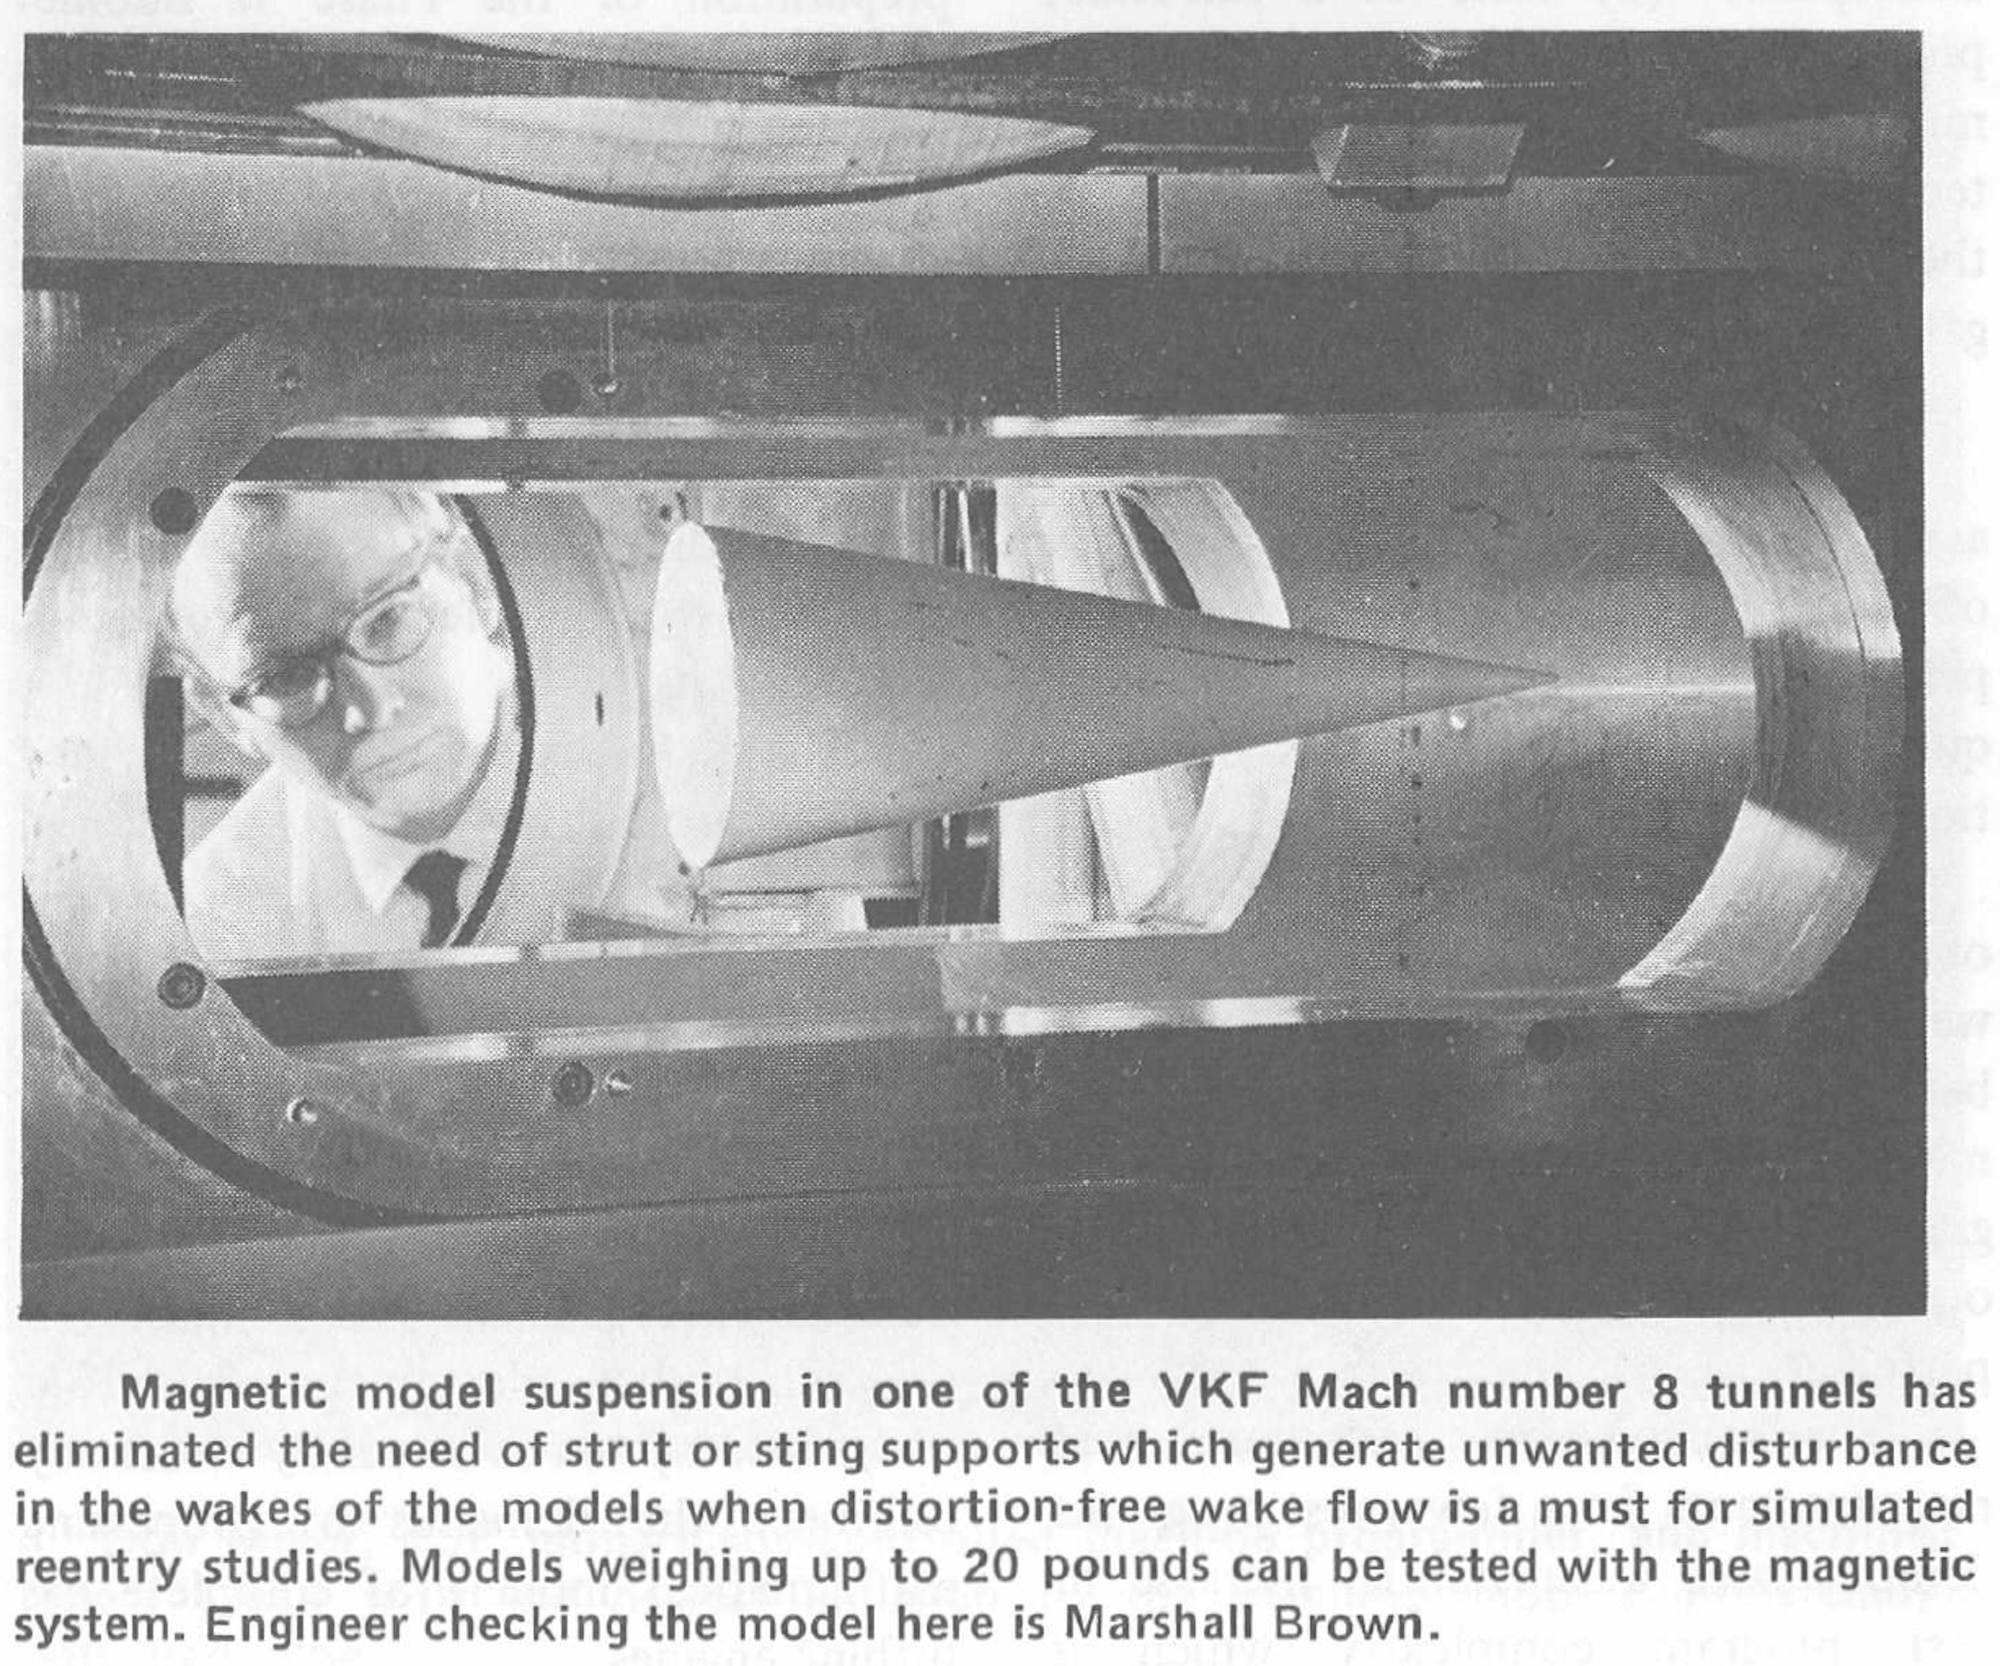 A former AEDC engineer checks a model suspended in the Tunnel E wind tunnel at Arnold Air Force Base in January 1972. In Tunnel E, a magnetic model support system (MMSS) was used, which eliminated the need for strut or sting supports.